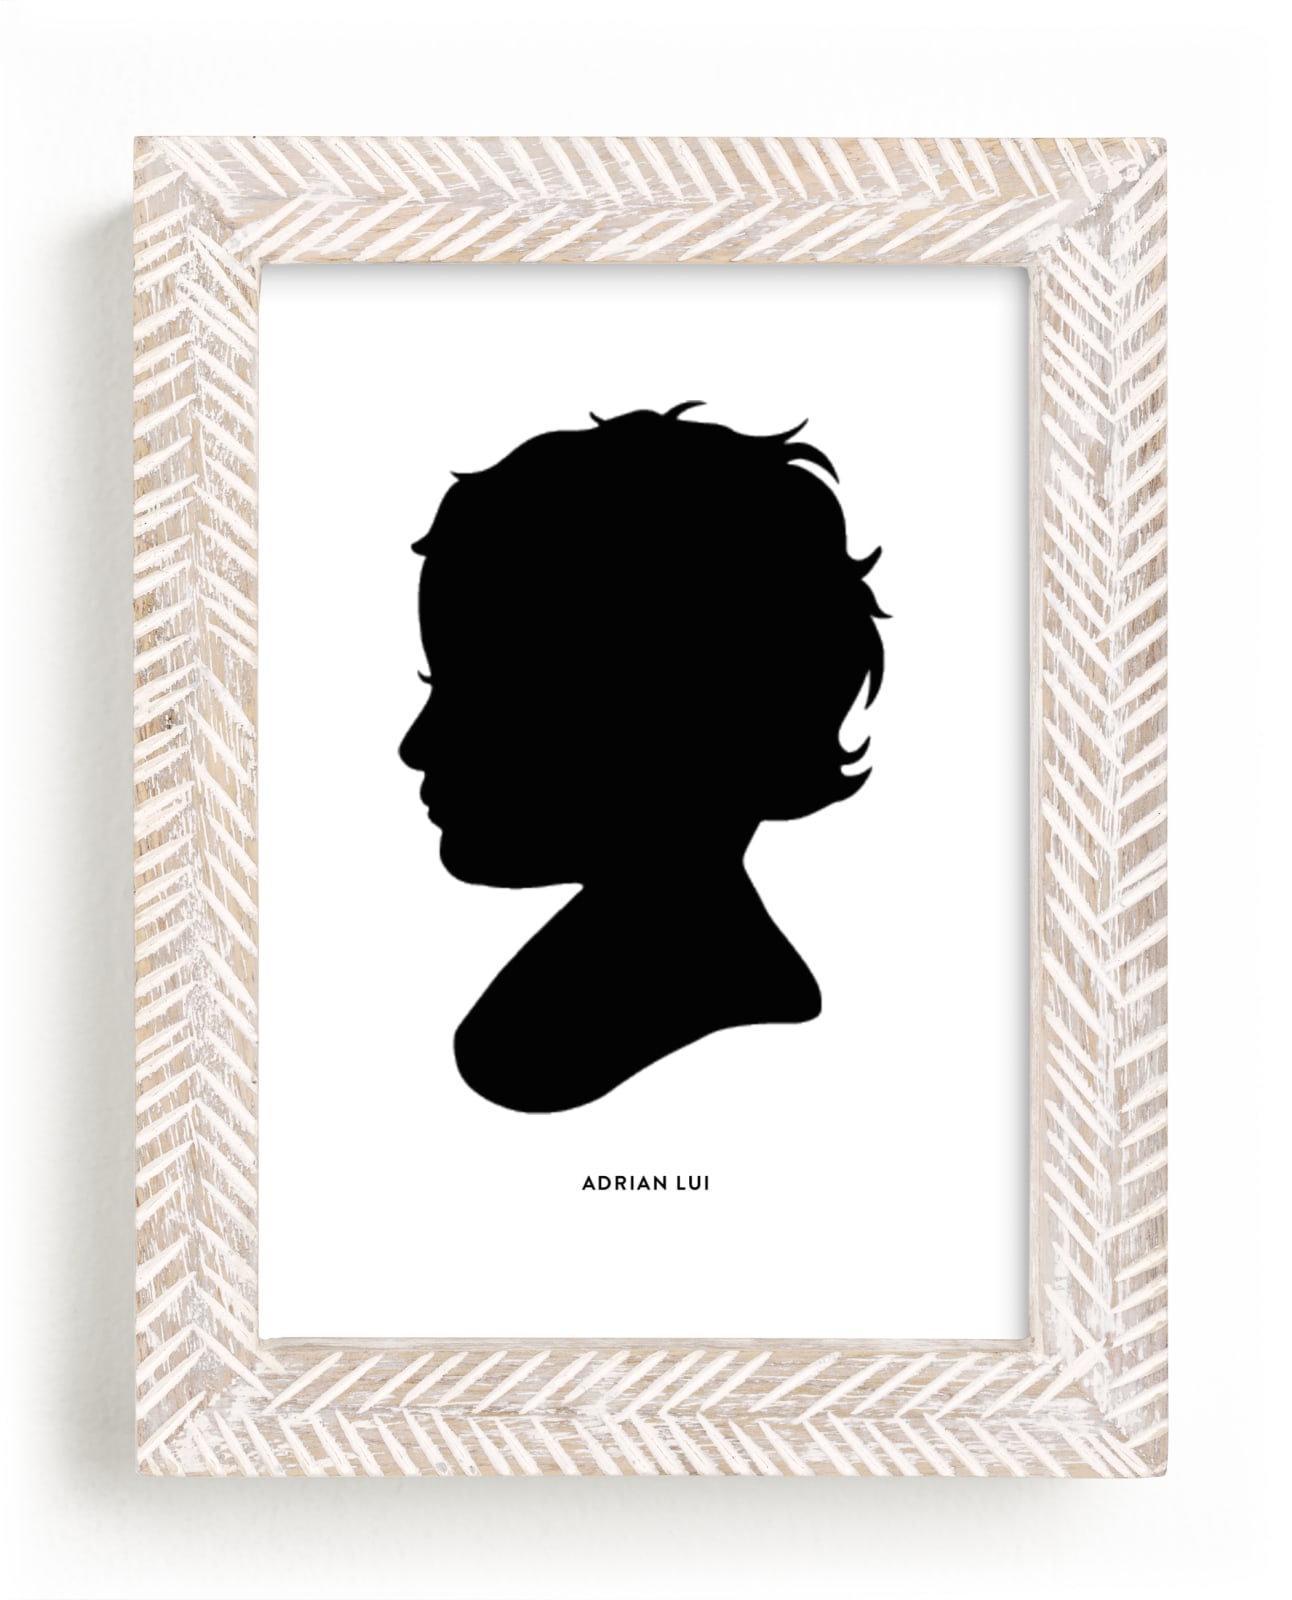 This is a black and white, black silhouette art by Minted called Custom Silhouette Art.